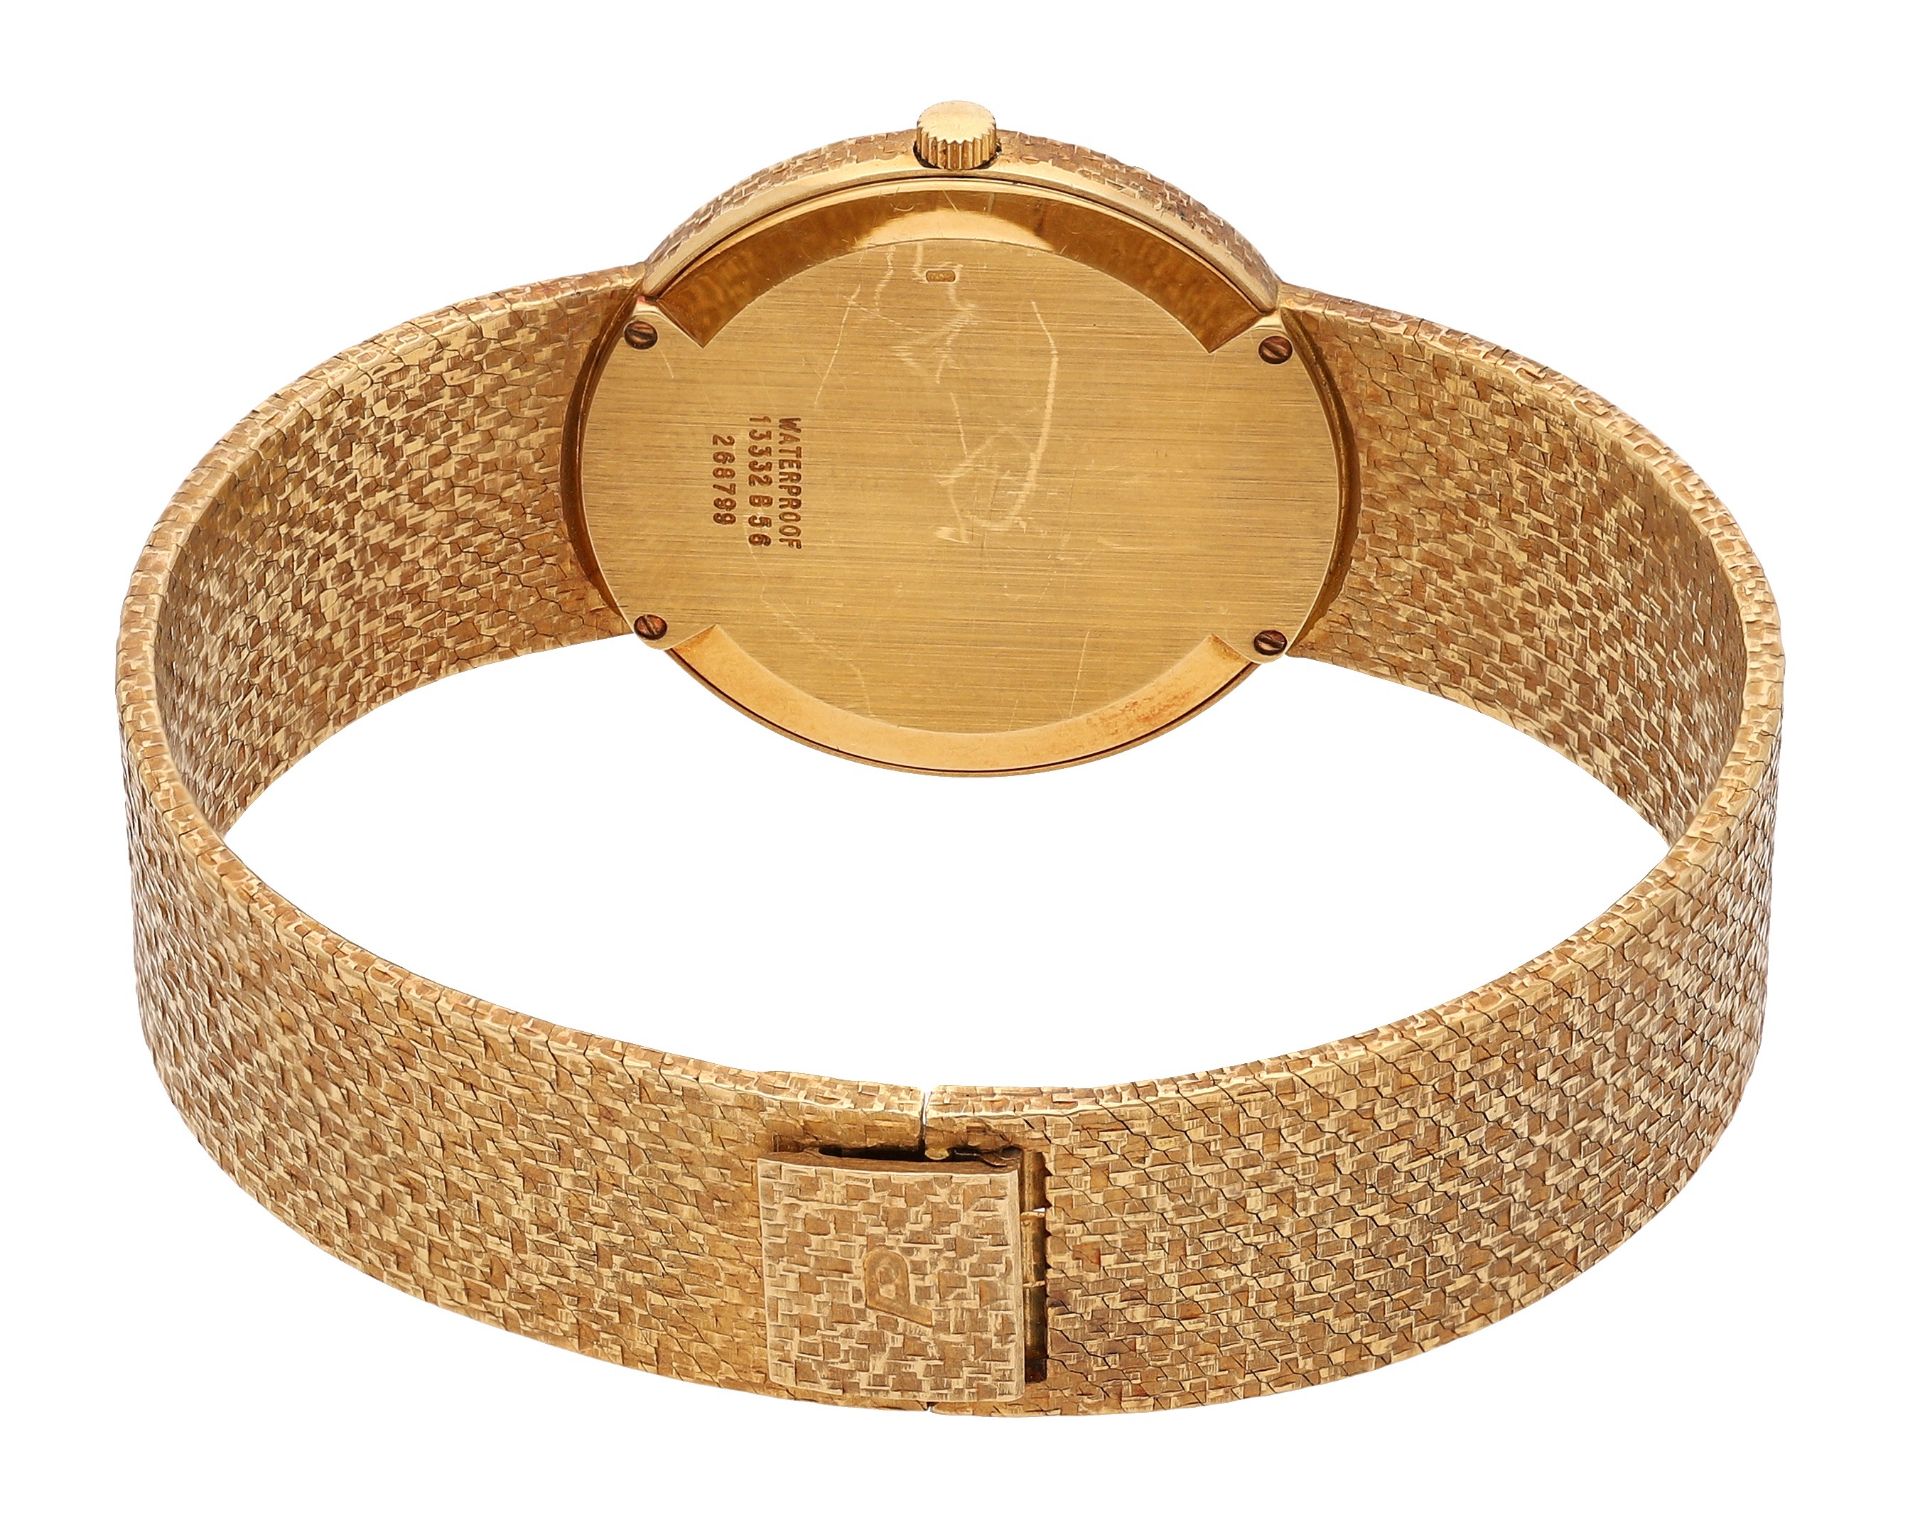 Piaget. A gold automatic bracelet watch with date, Ref. 13332, circa 1976. Movement: cal. 1... - Image 2 of 4